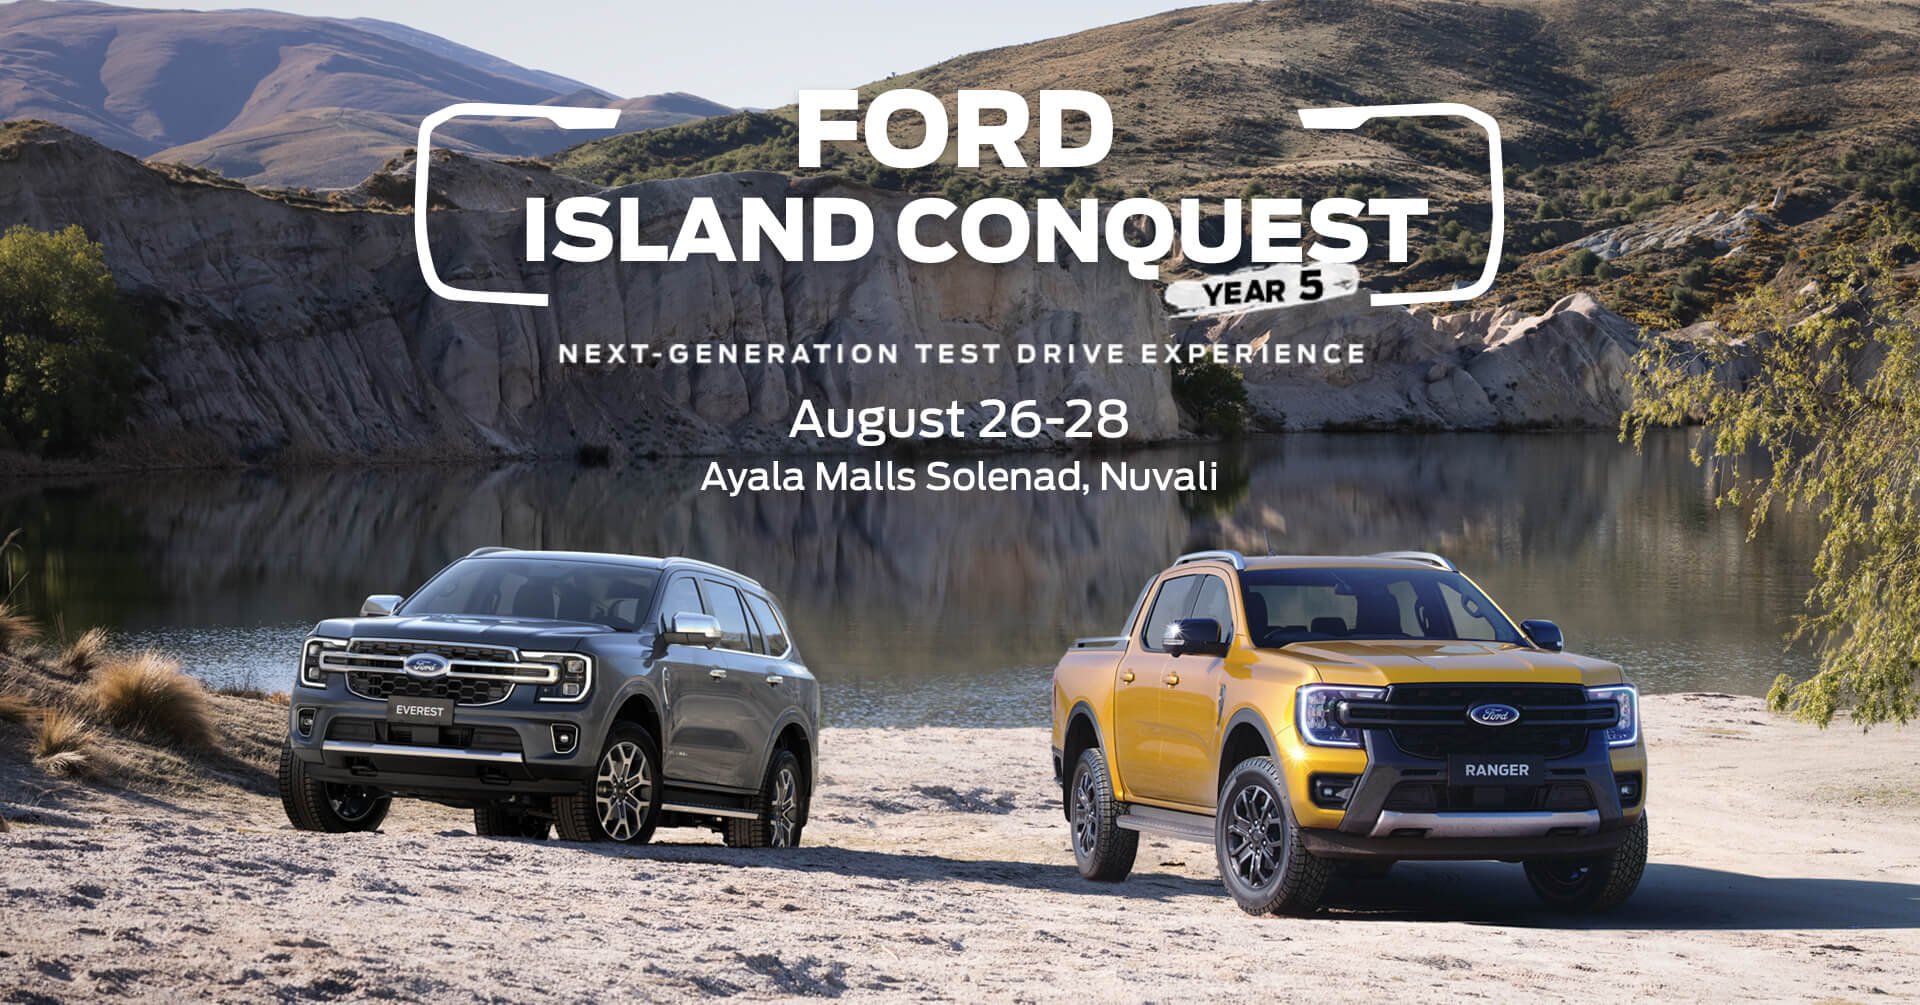 Ford Island Conquest - Dearborn Motors